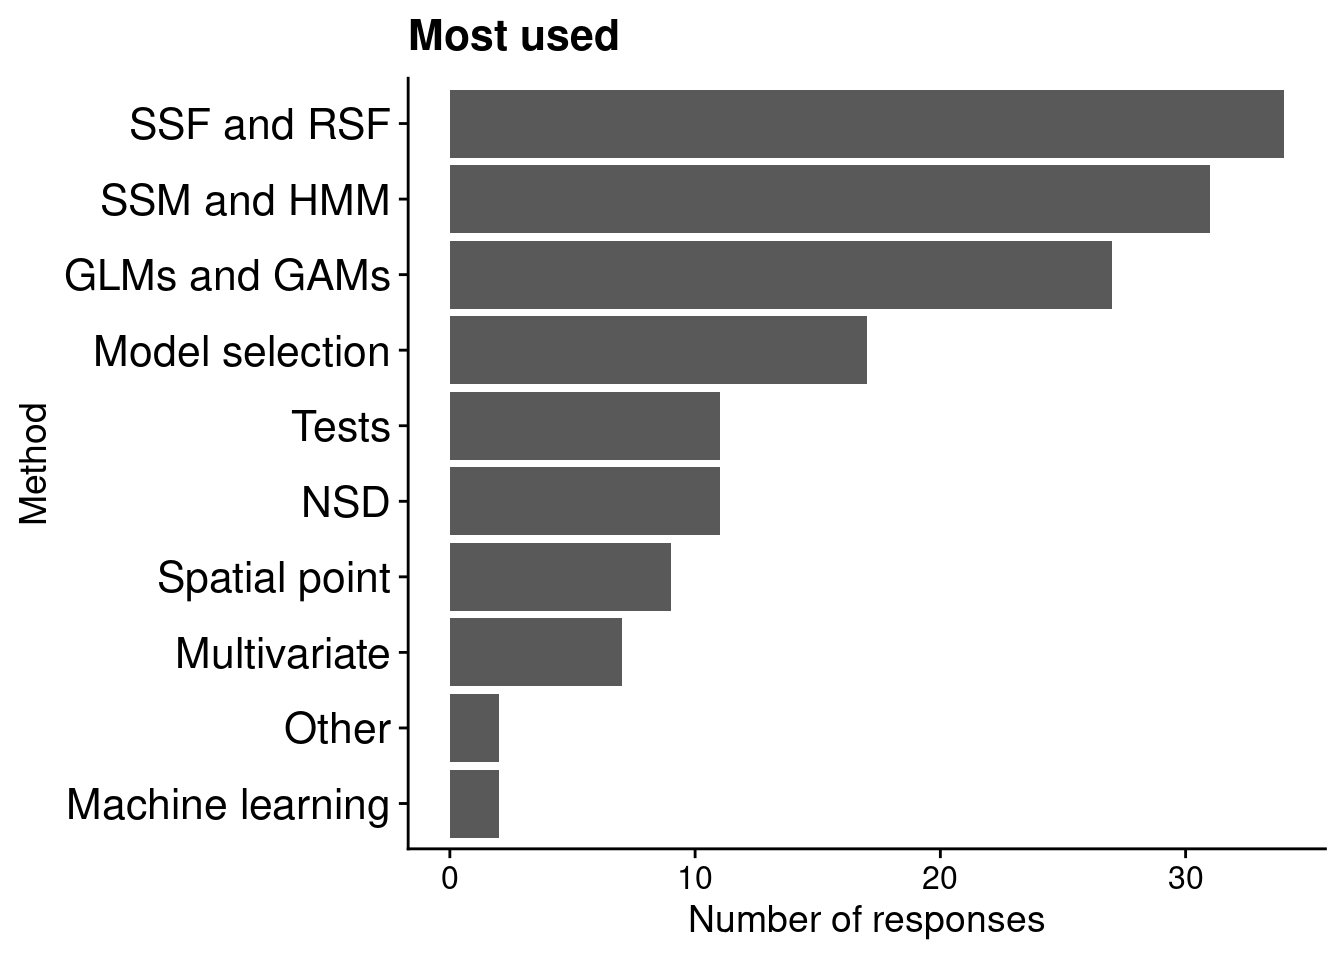 Horizontal bar plots indicating participants' votes on which statistical/mathematical methods are the most used. In decreasing order of votes: SSF and RSF, SSM and HMM, GLMs and GAMs, model selection, tests, NSD, spatial point, multivariate, other, and machine learning.